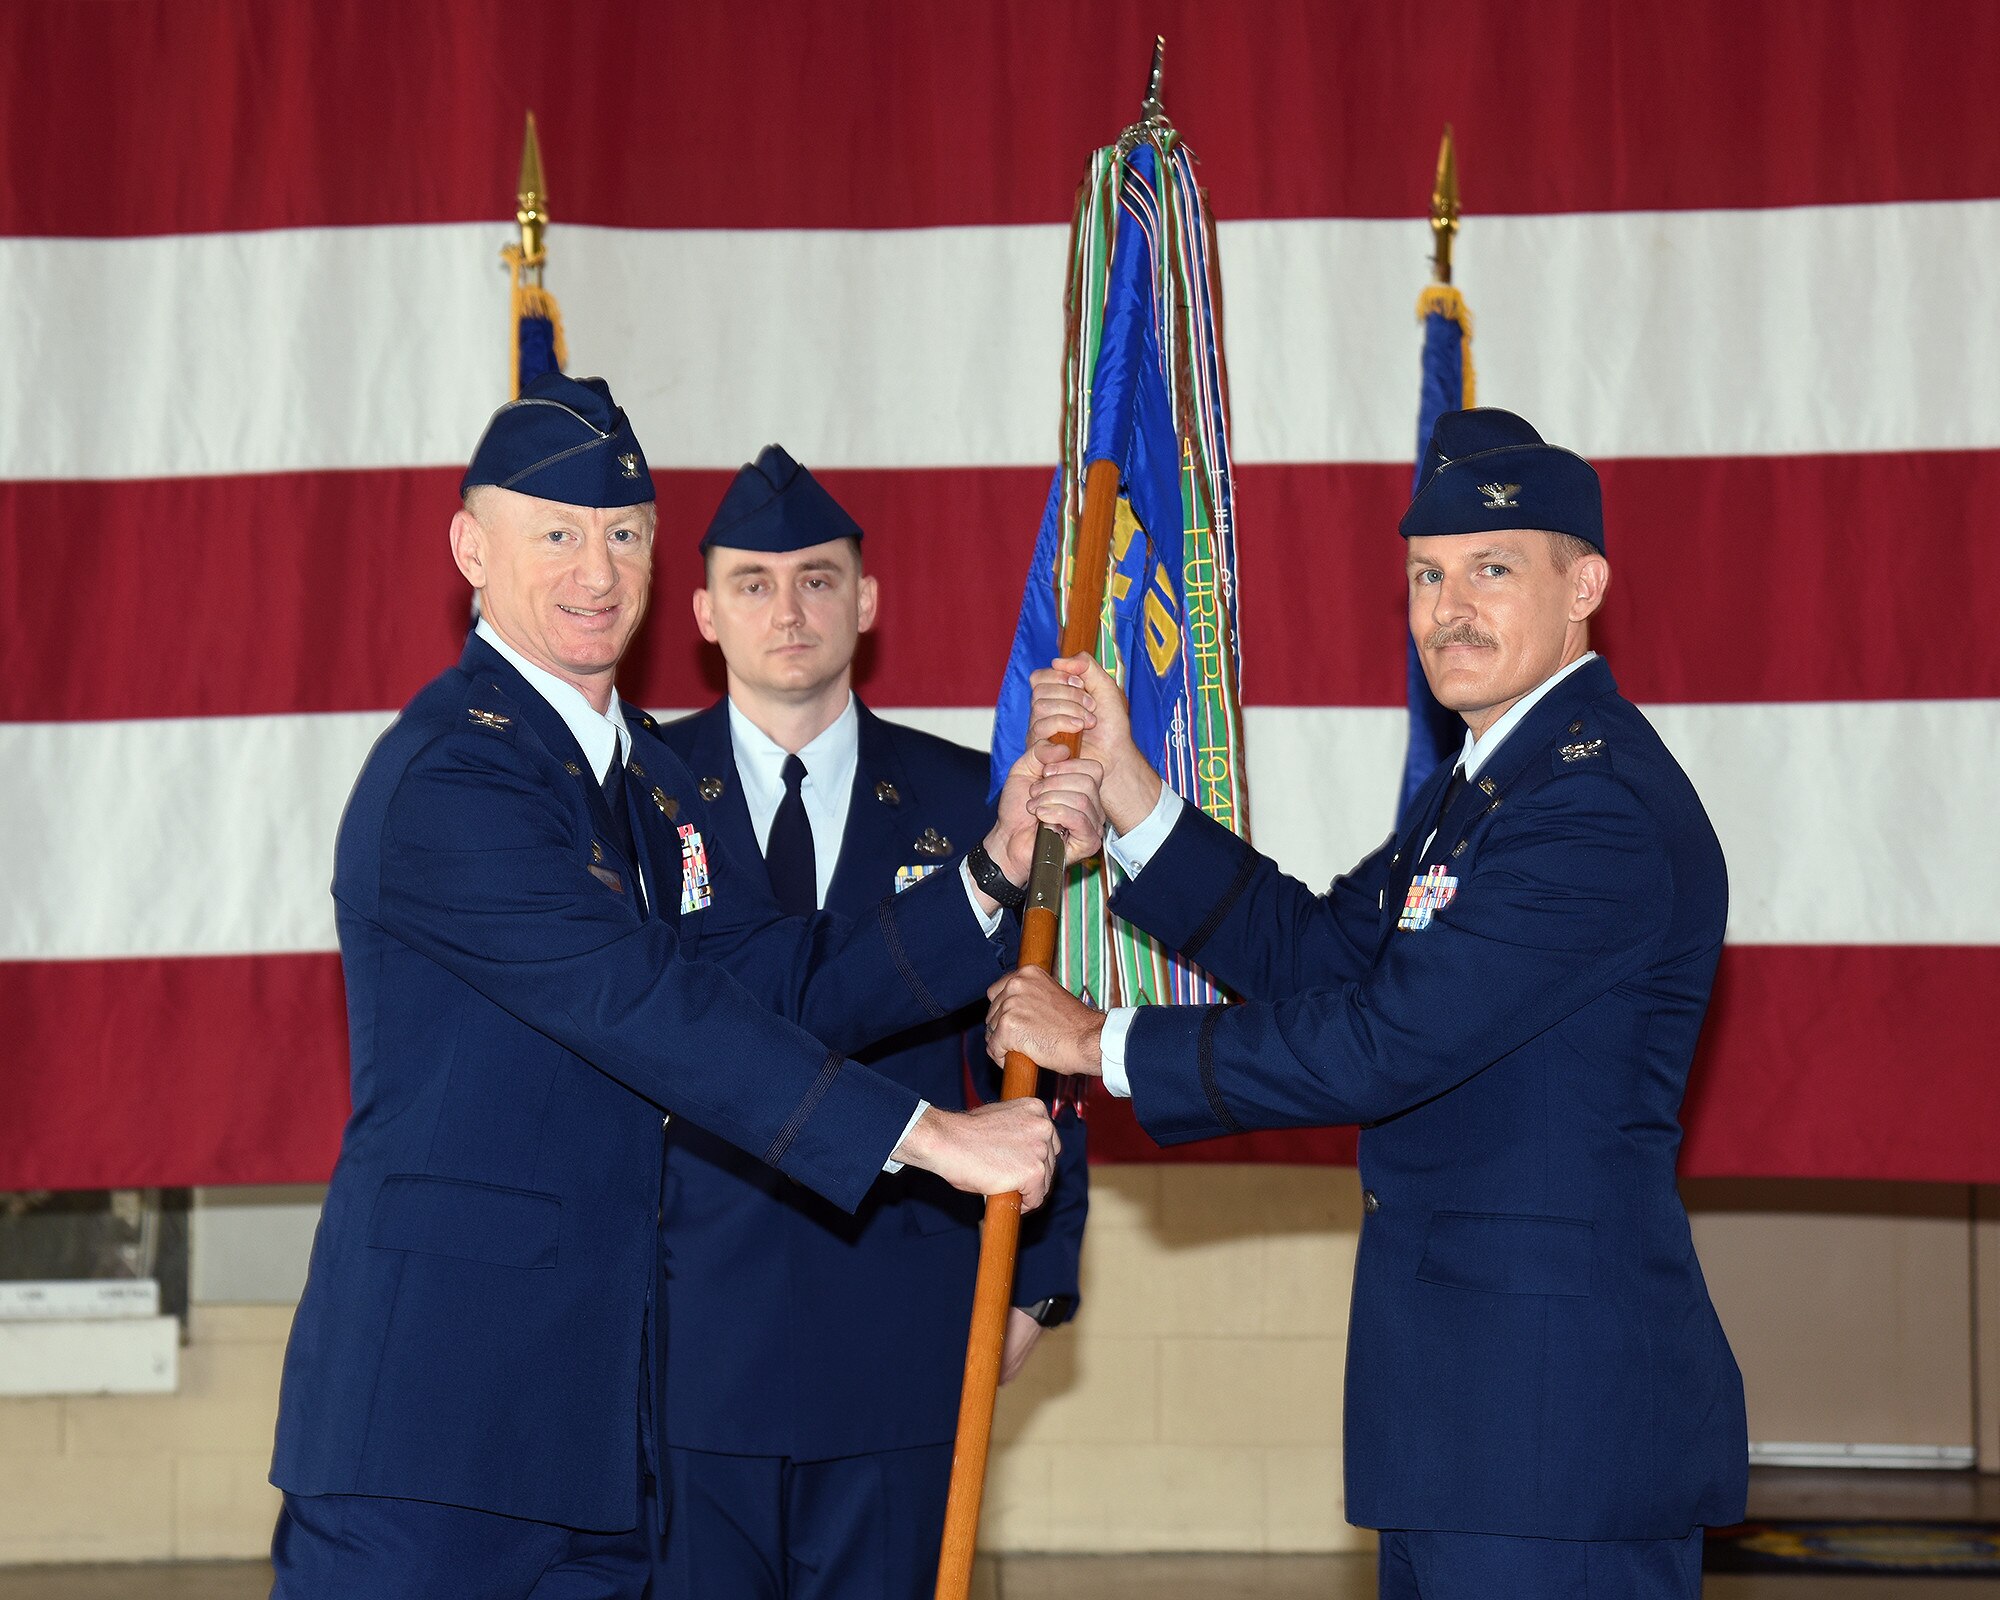 Col. Seth Graham, 14th Flying Training Wing commander, hands Col. Justin Spears, 14th Operations Group commander, the 14th OG guidon at the 14th OG change of command ceremony on July 24, 2020, at Columbus Air Force Base, Miss. The 14th Operations Group and its six squadrons are responsible for the 52-week Specialized Undergraduate Pilot Training (SUPT) mission at Columbus. The group also performs quality assurance for contract aircraft maintenance. (U.S. Air Force photo by Elizabeth Owens)